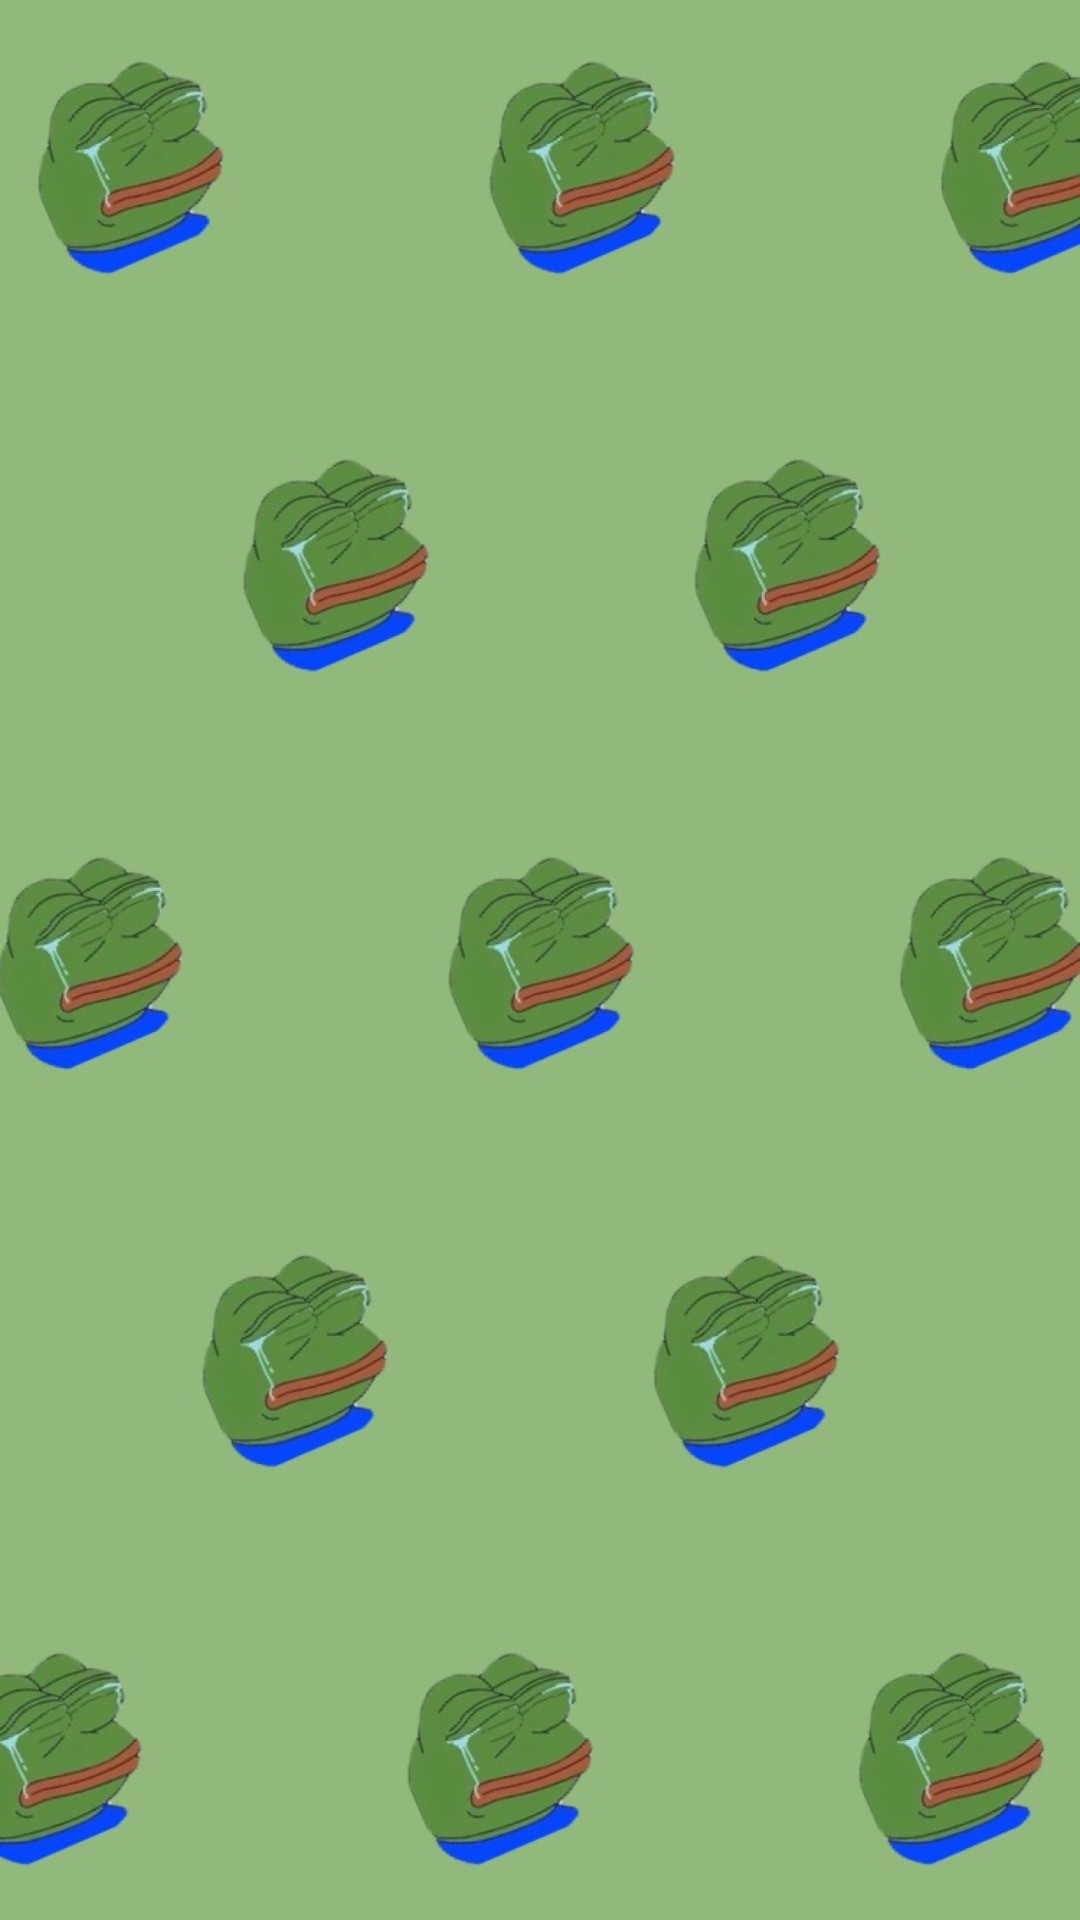 1080x1920 tumblr pepe request iphone background iphone wallpaper iphone 5 wallpapers  iphone 5 background wallpapers iphone 6 background iphone 6 wallpaper i  made this